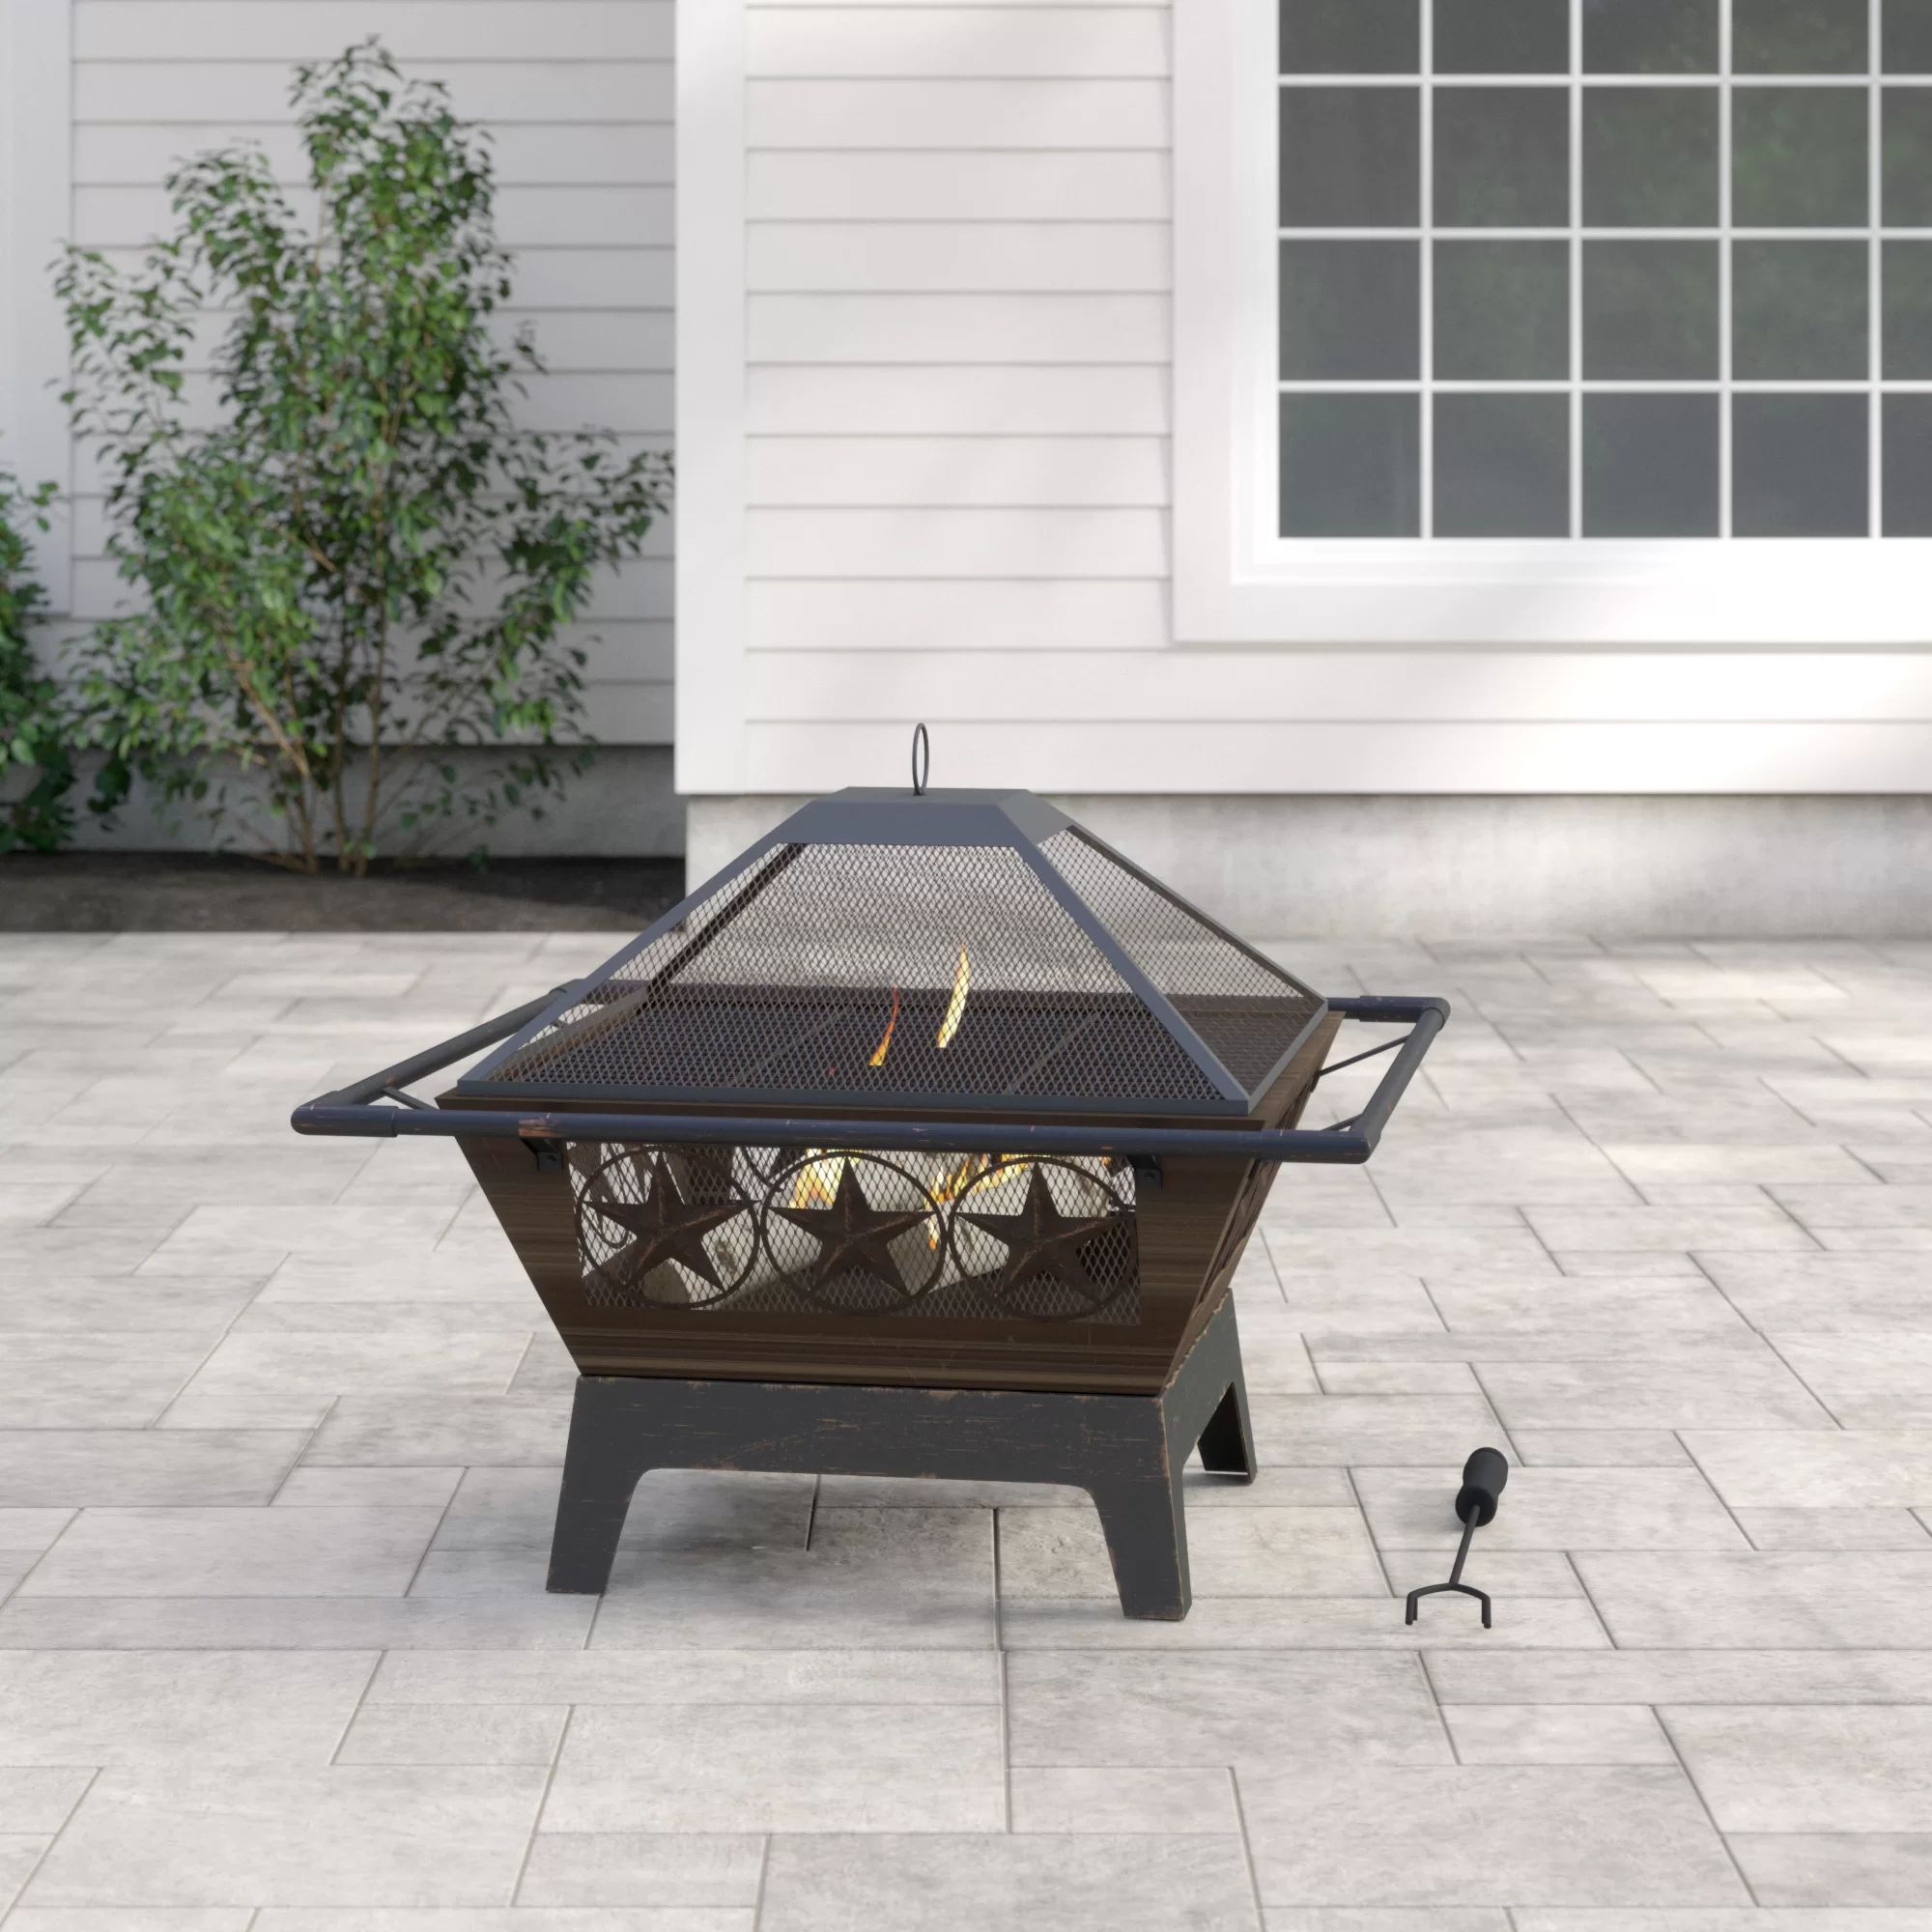 Roswita 26'' H x 32'' W Steel Wood Burning Outdoor Fire Pit with Lid | Wayfair North America